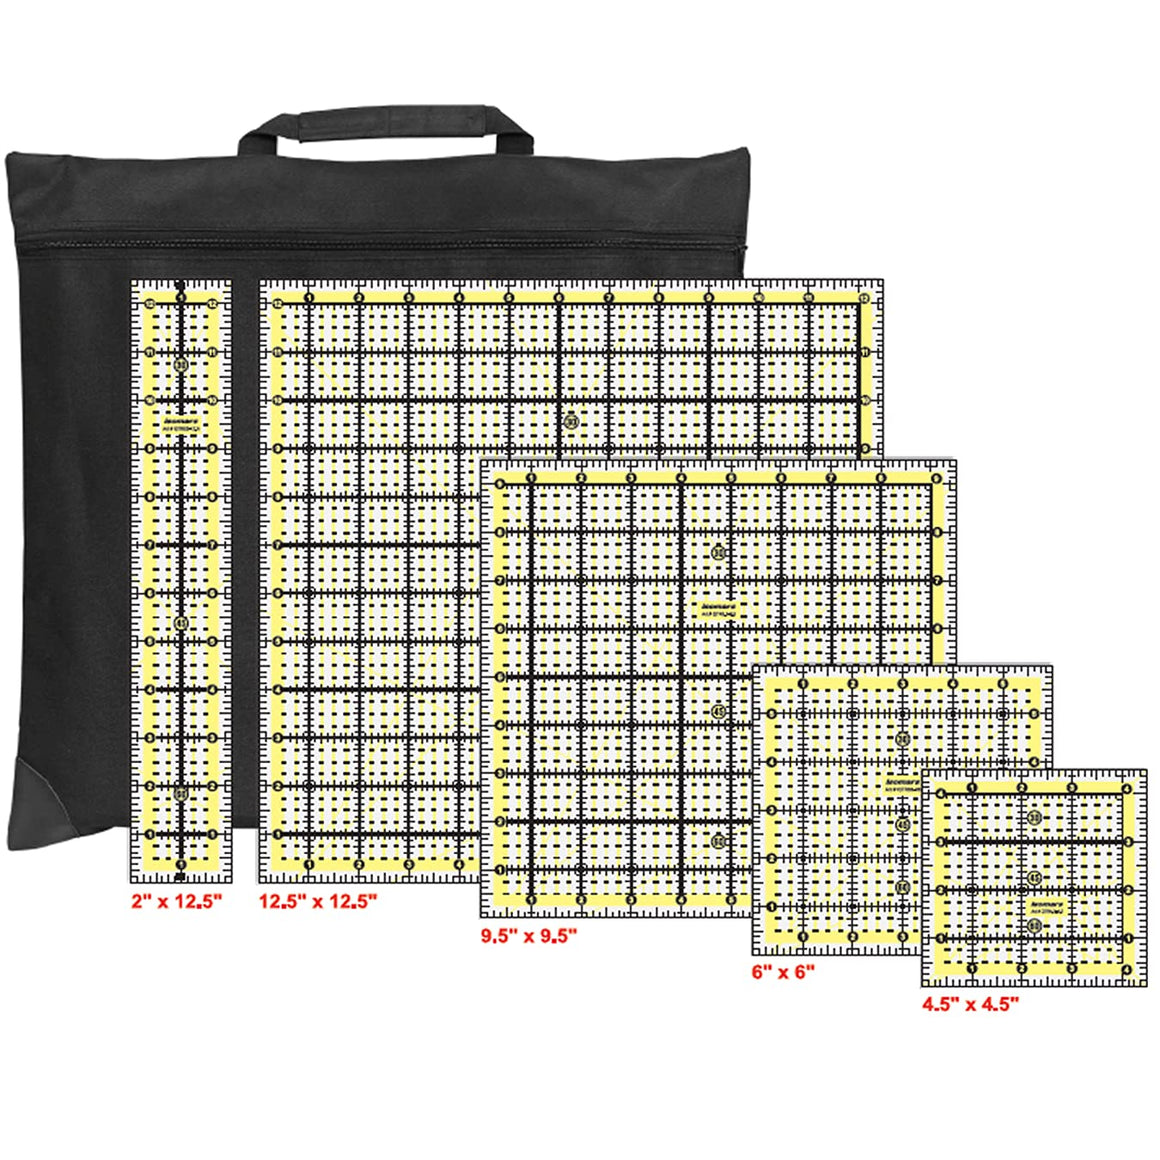 Quilting Ruler (Set of 5) with Bag